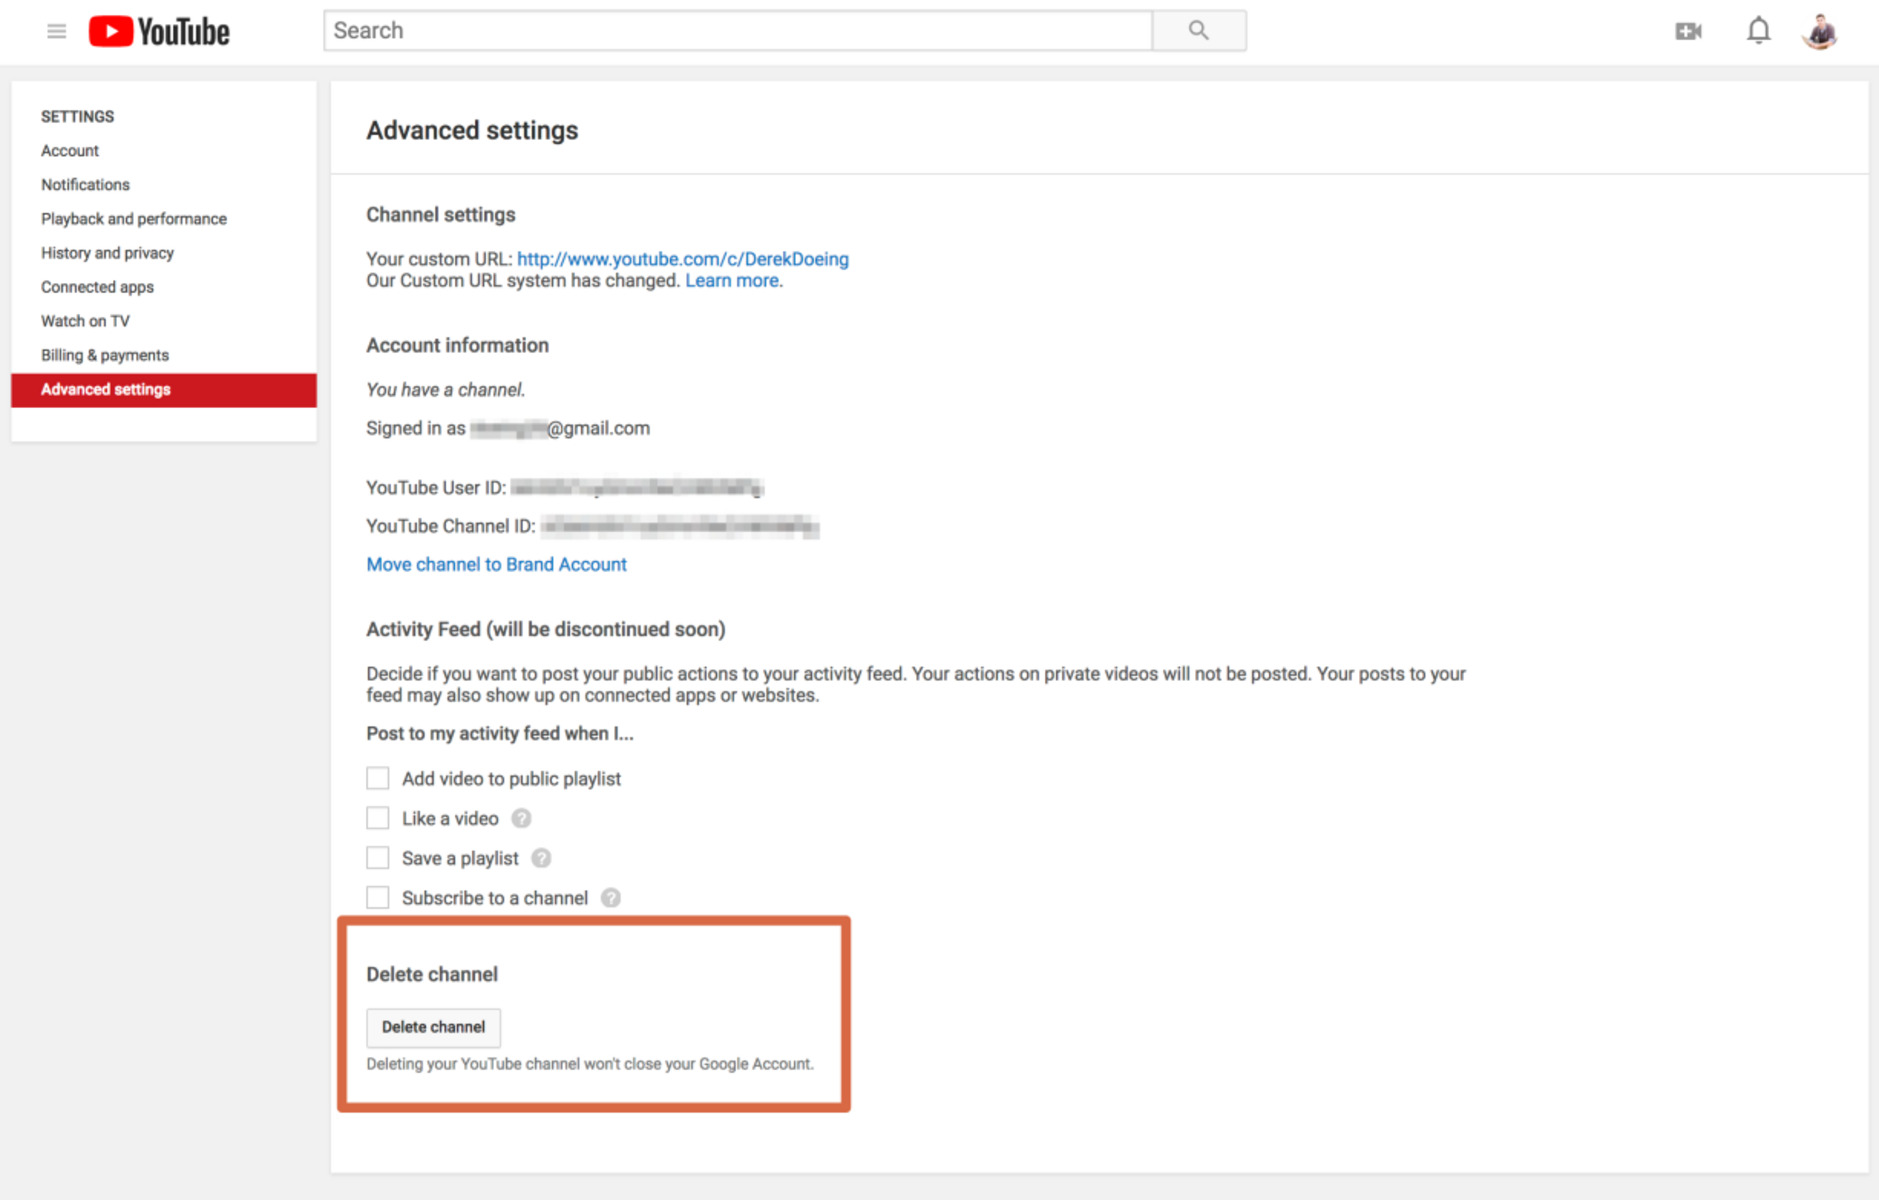 How To Delete A YouTube Account